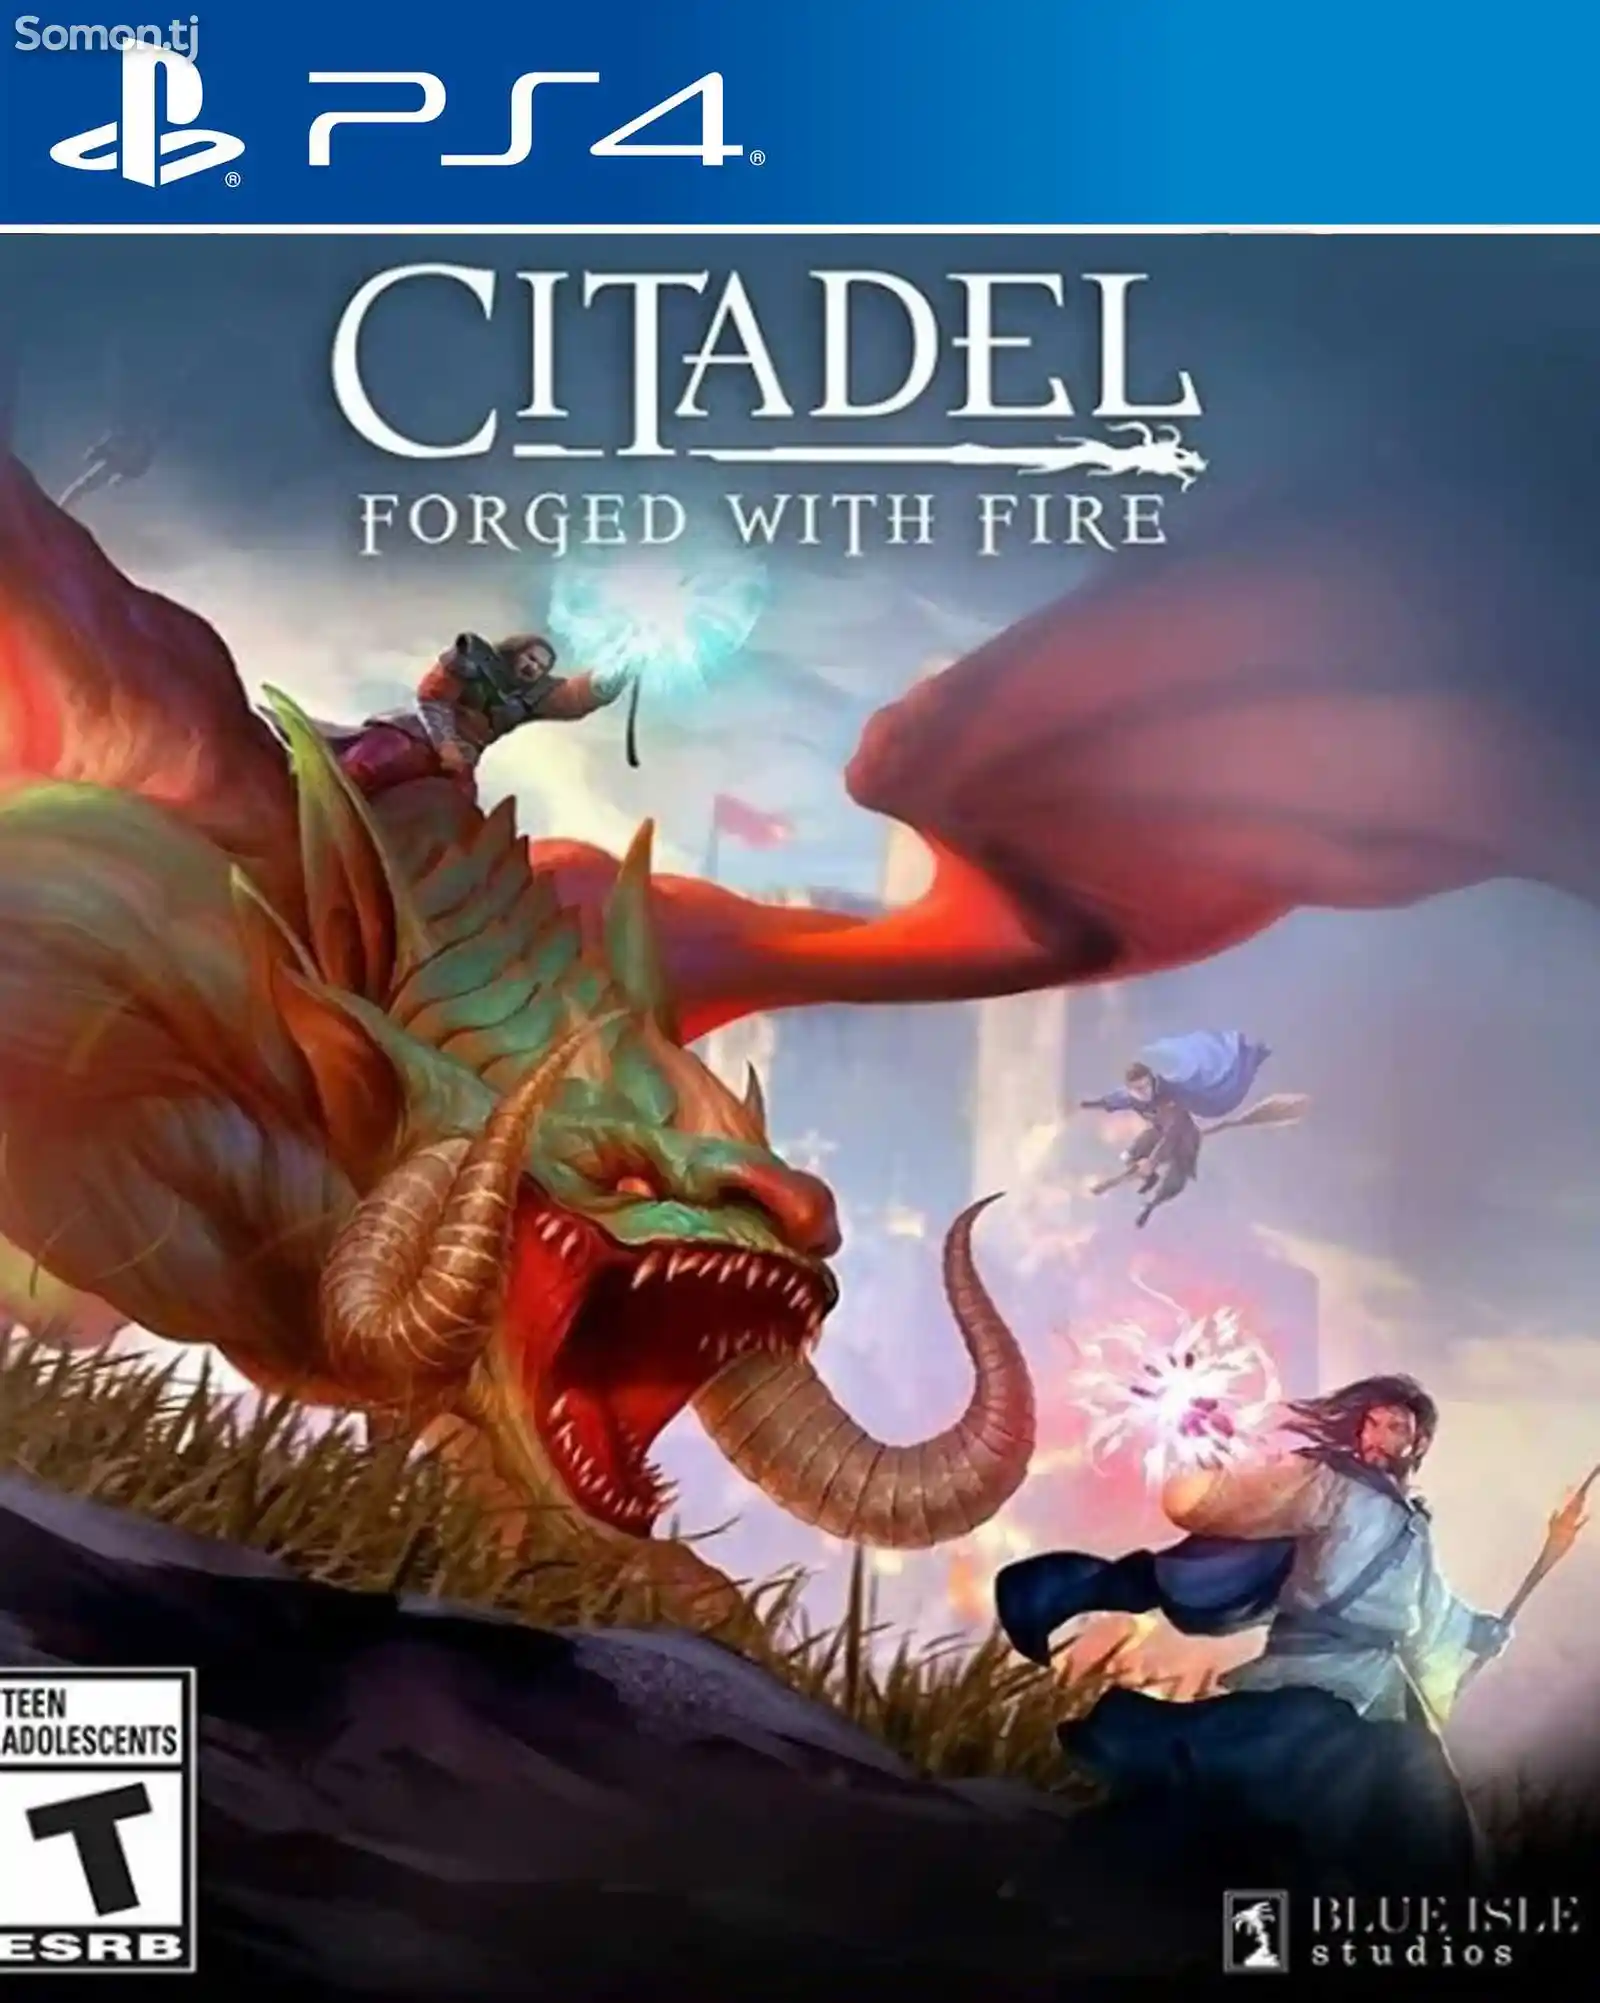 Игра Citadel forged with fire для PS-4 / 5.05 / 6.72 / 7.02 / 7.55 / 9.00 /-1